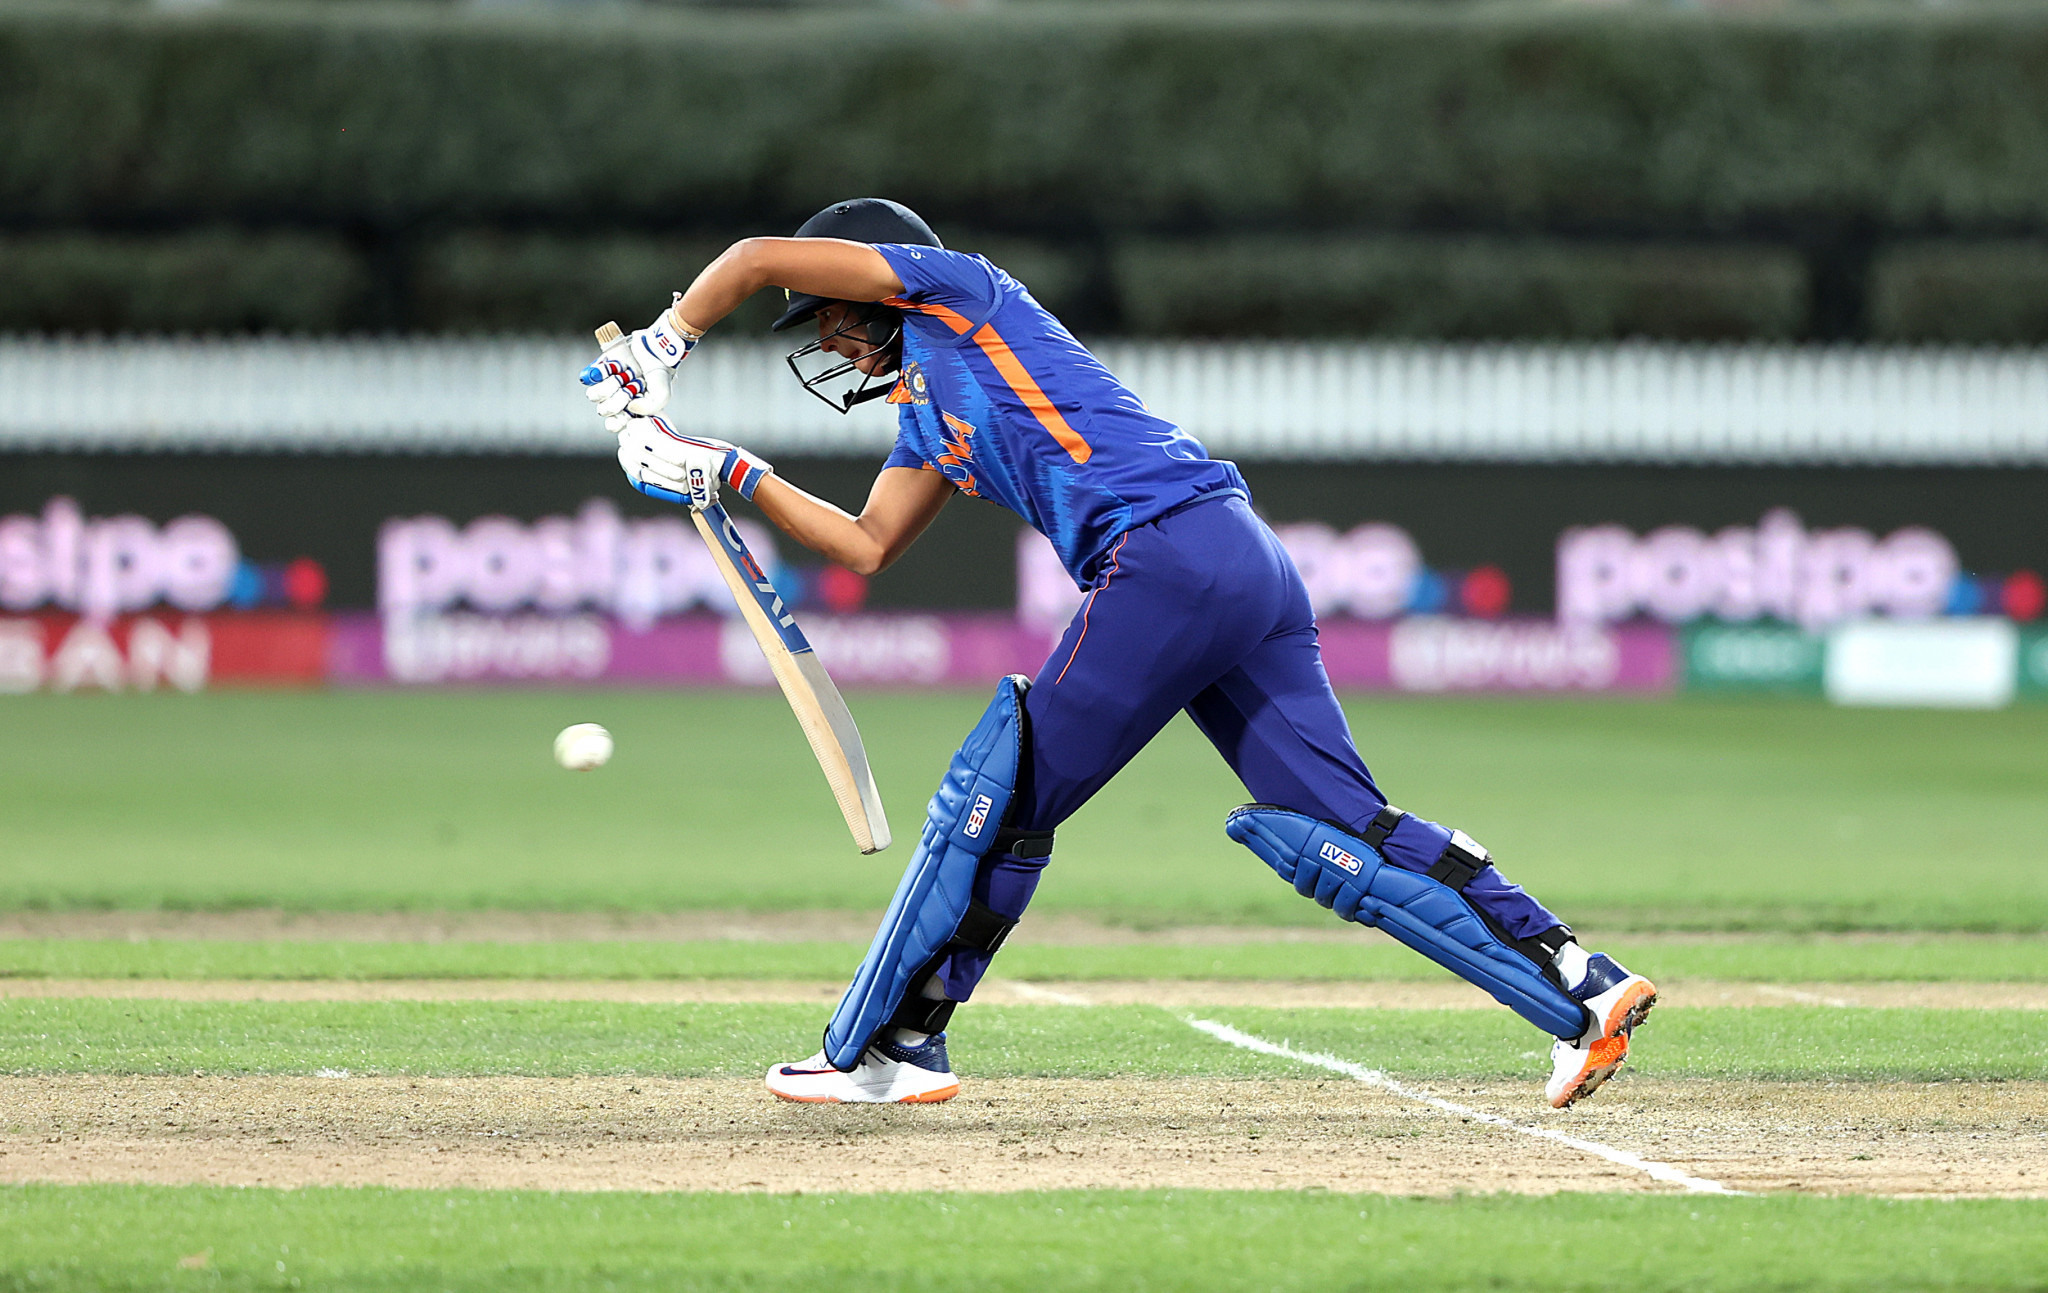 Harmanpreet Kaur scored 109 as India registered a massive 155-run win over West Indies at the Women's Cricket World Cup ©Getty Images 